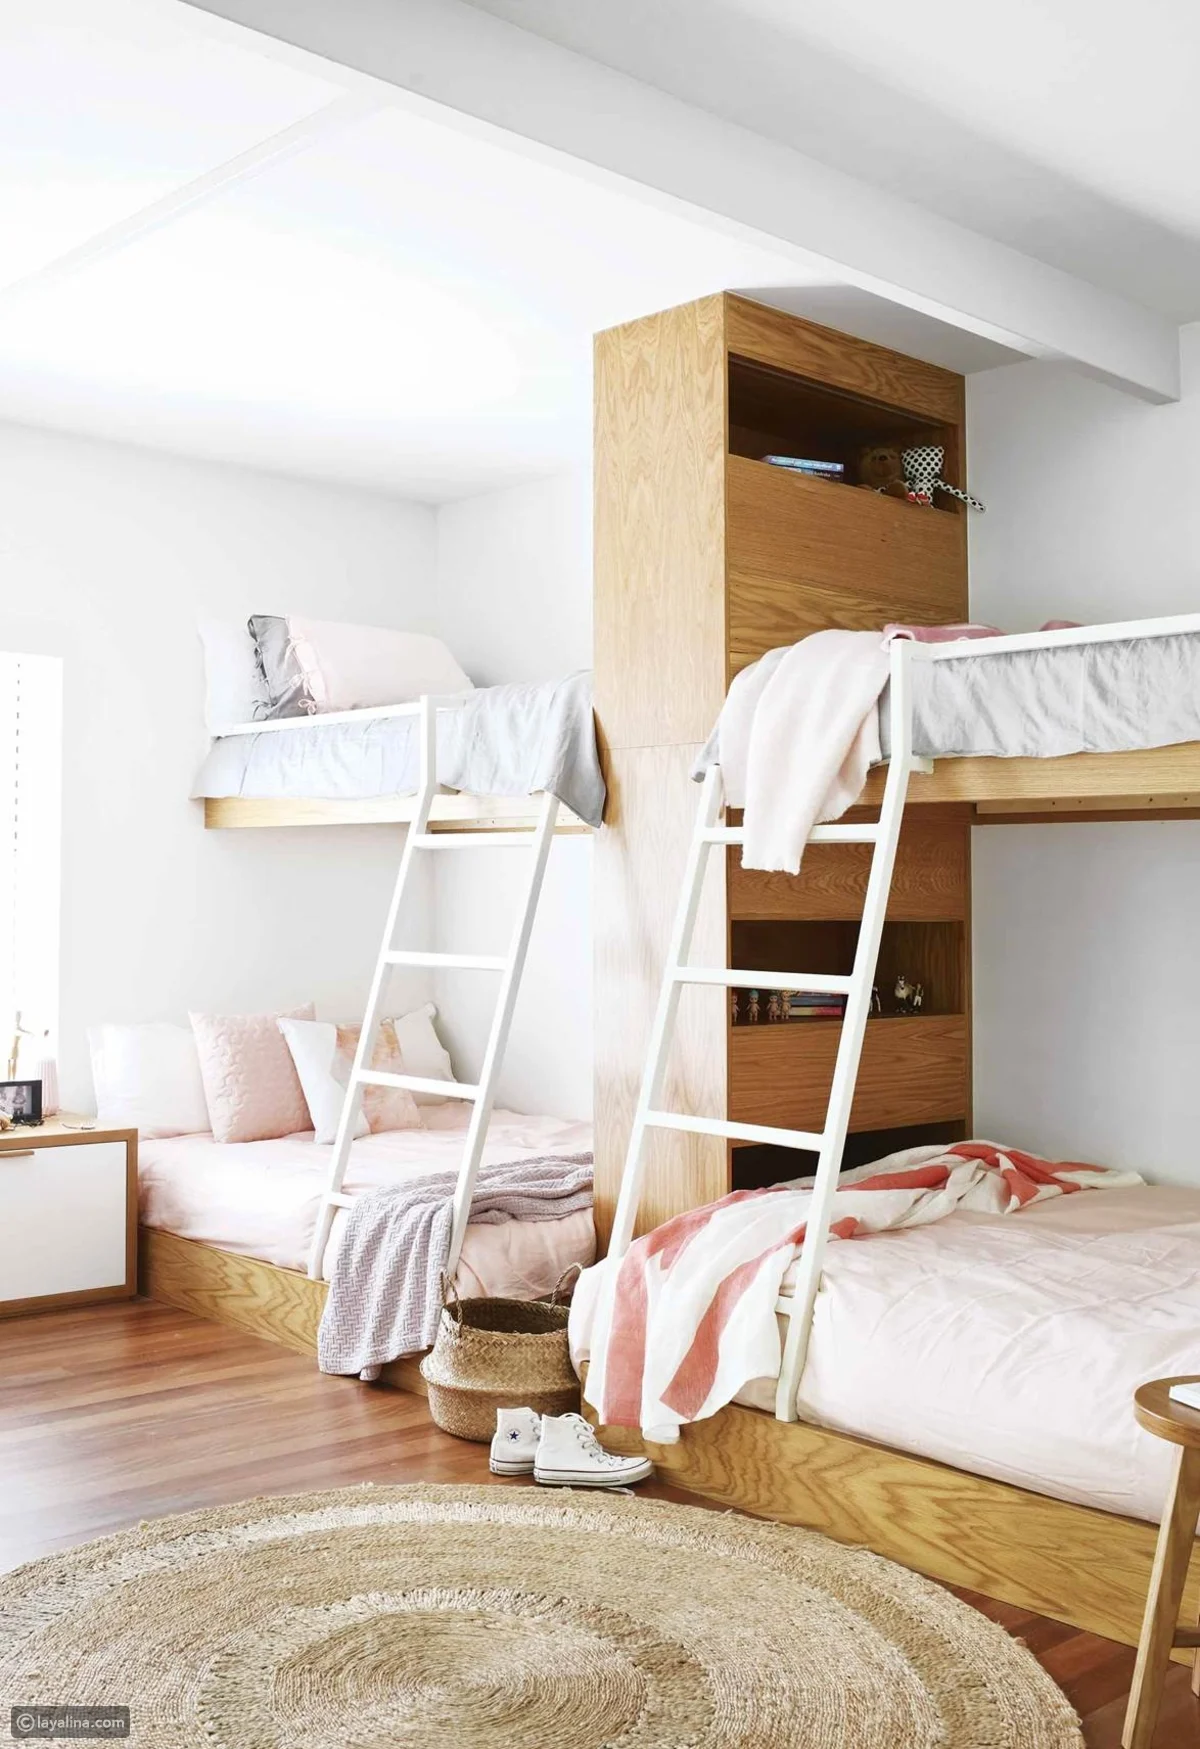 This renovated beach house in Noosa features a curious kids' bedroom configuration involving twin custom bunk beds. With four daughters, two of whom now live out of home, this space was designed to encourage communication and connection between the children.